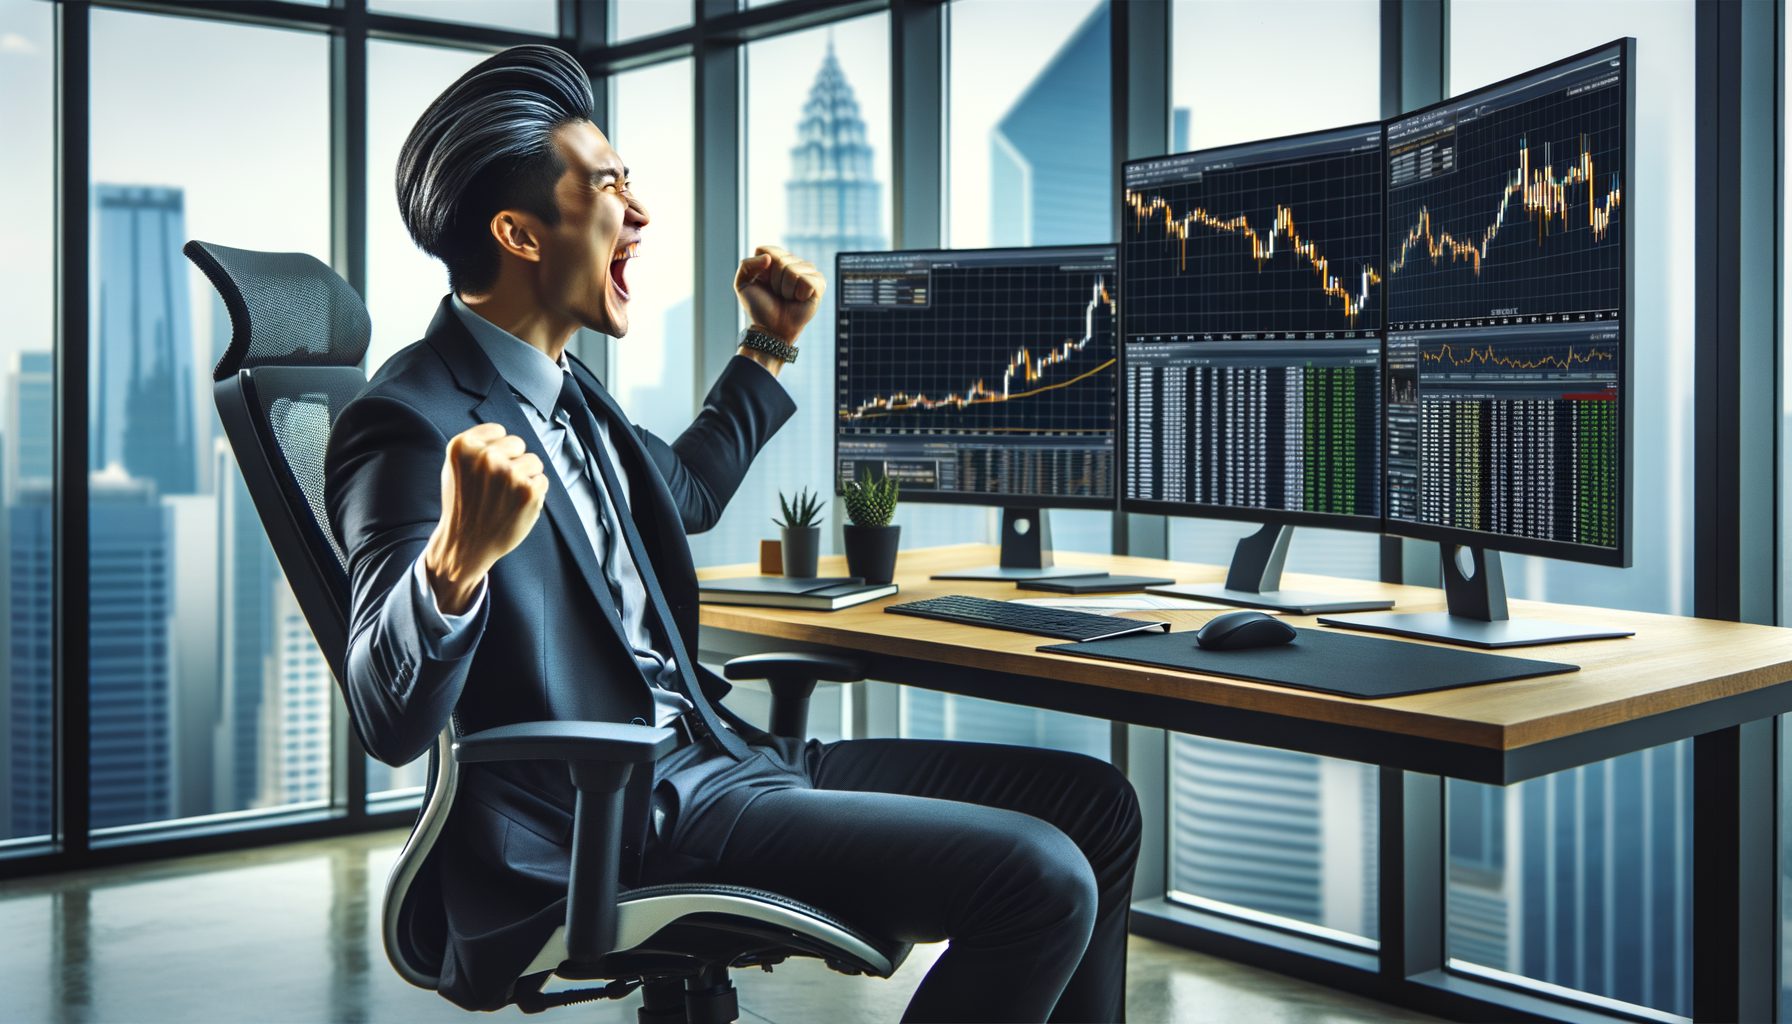 Cryptocurrency Trader's $10K Soars To $400K, Here's How